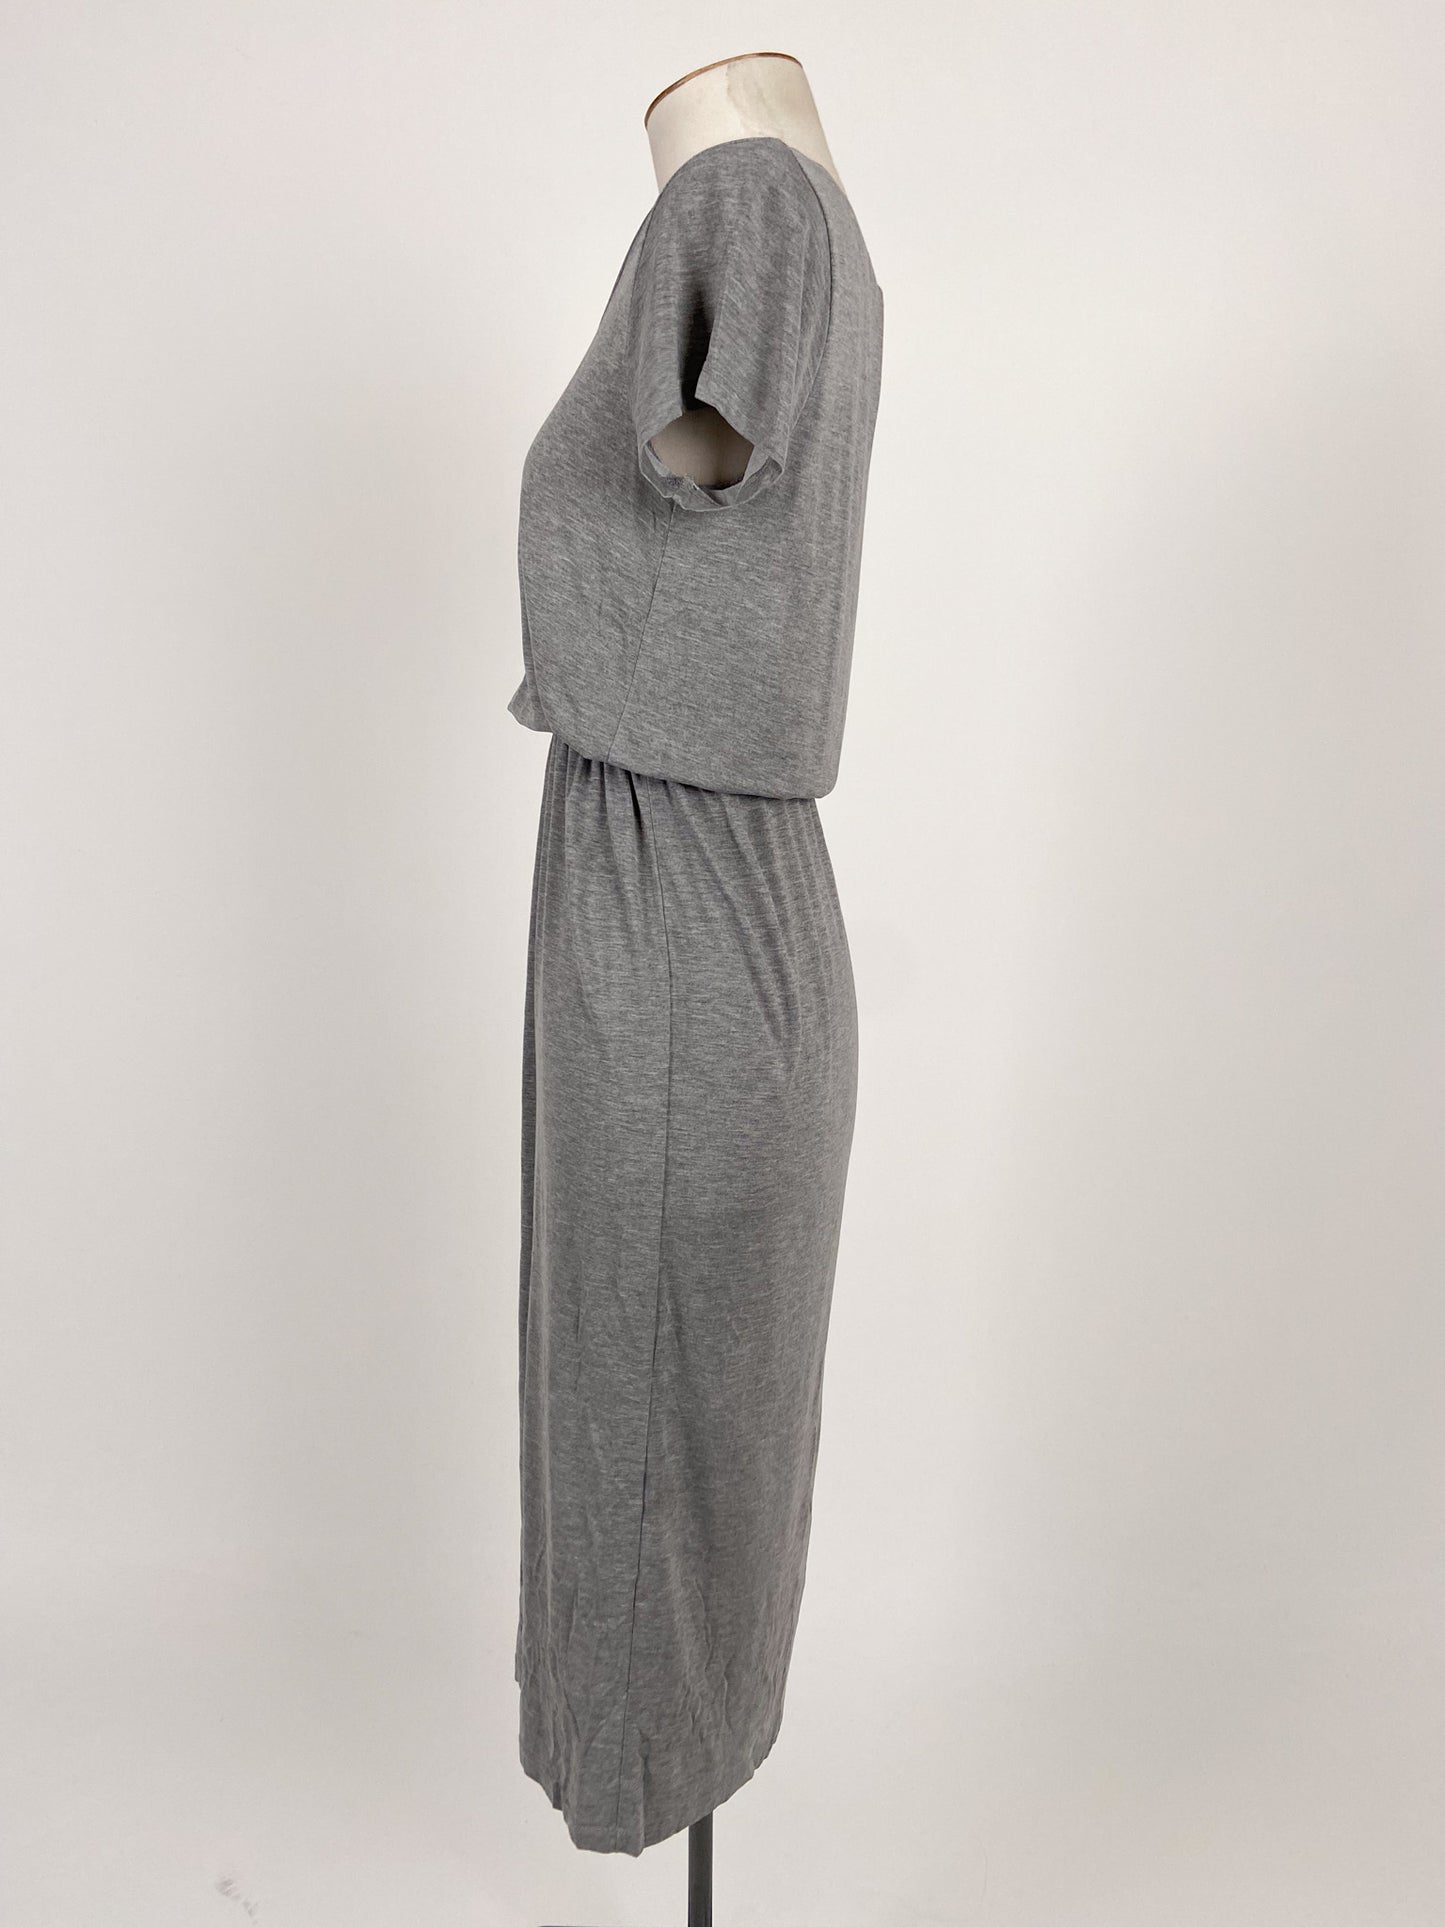 Forever 21 | Grey Casual/Workwear Dress | Size S